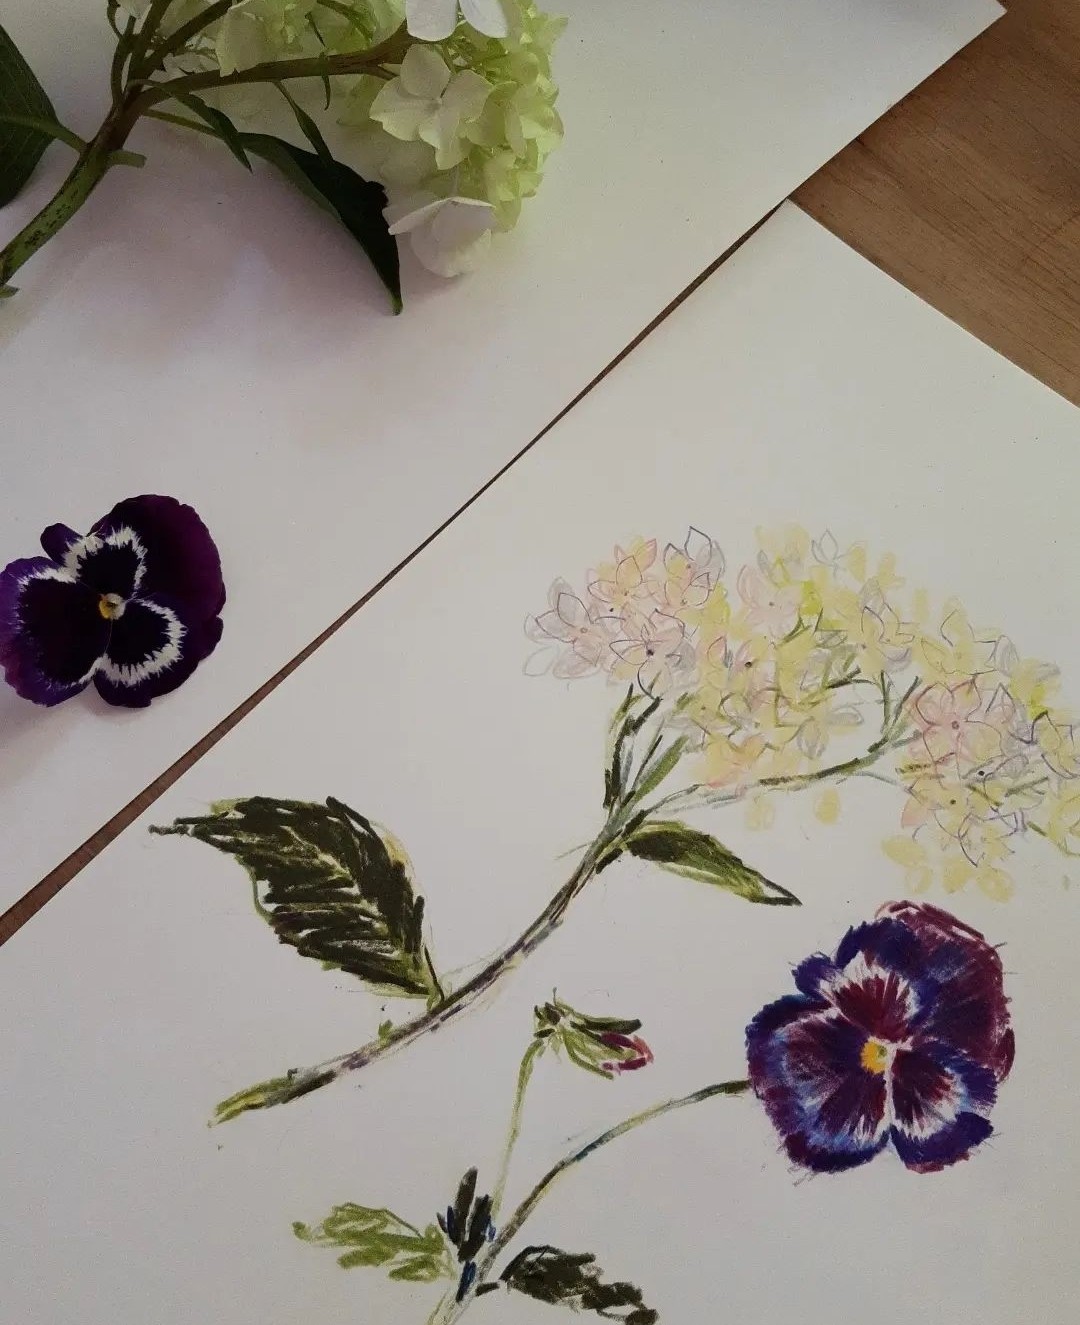 Pansy and hydrangea illustrations by Claudia Lowry